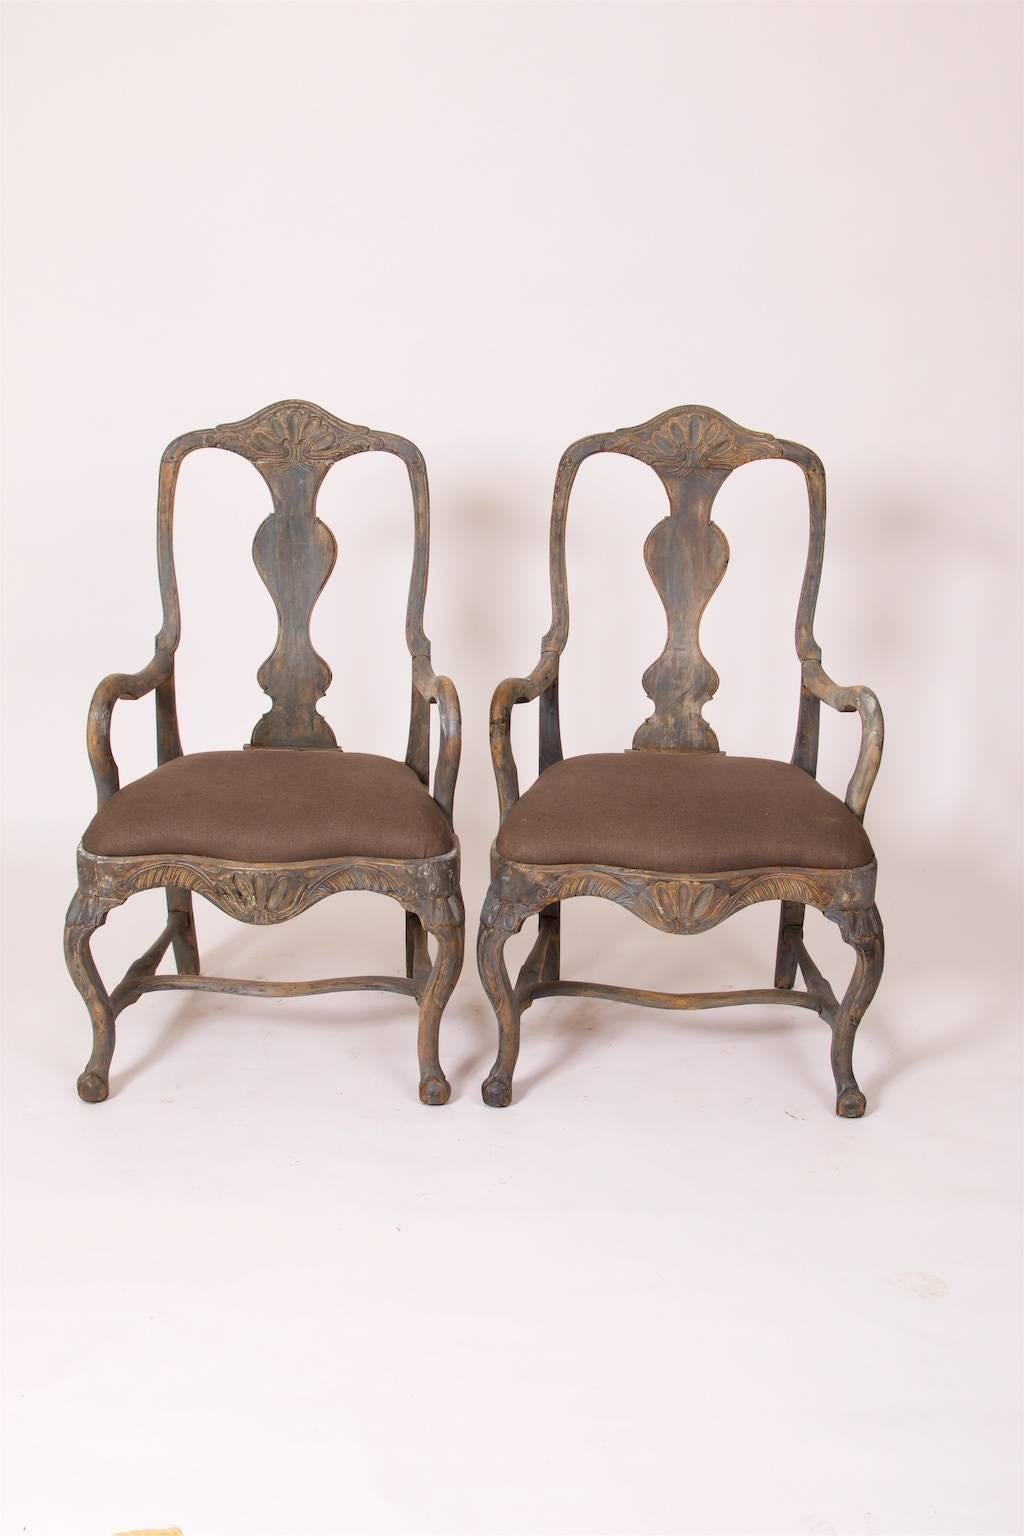 A very nice Pair of beautiful pidgeon blue Rococo armchairs, circa 1770, Made in Gothenburg, Sweden.
Dry scraped to original color and retouched. Reinforced with metal brackets underneath.
Comfortable and stable. New Linnen upholstery.